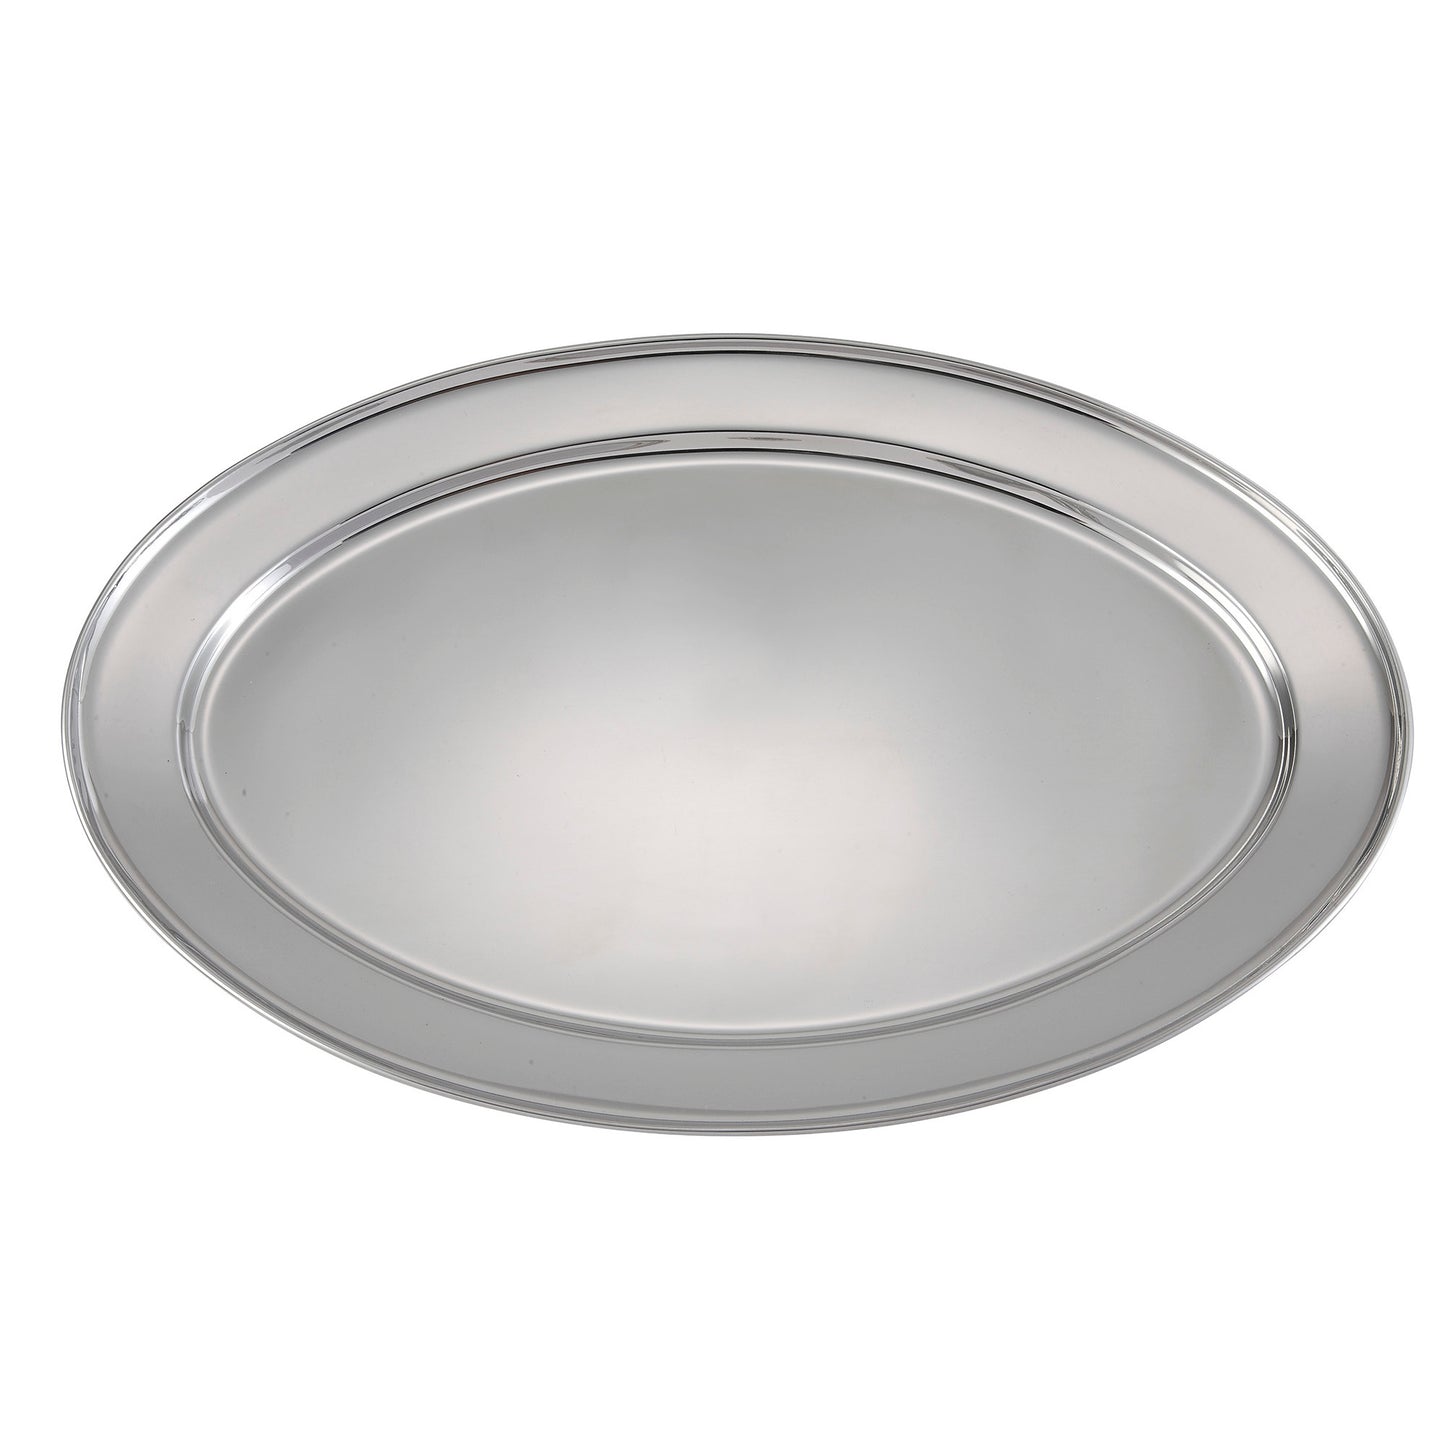 OPL-20 - Oval Platter, Stainless Steel - 20"